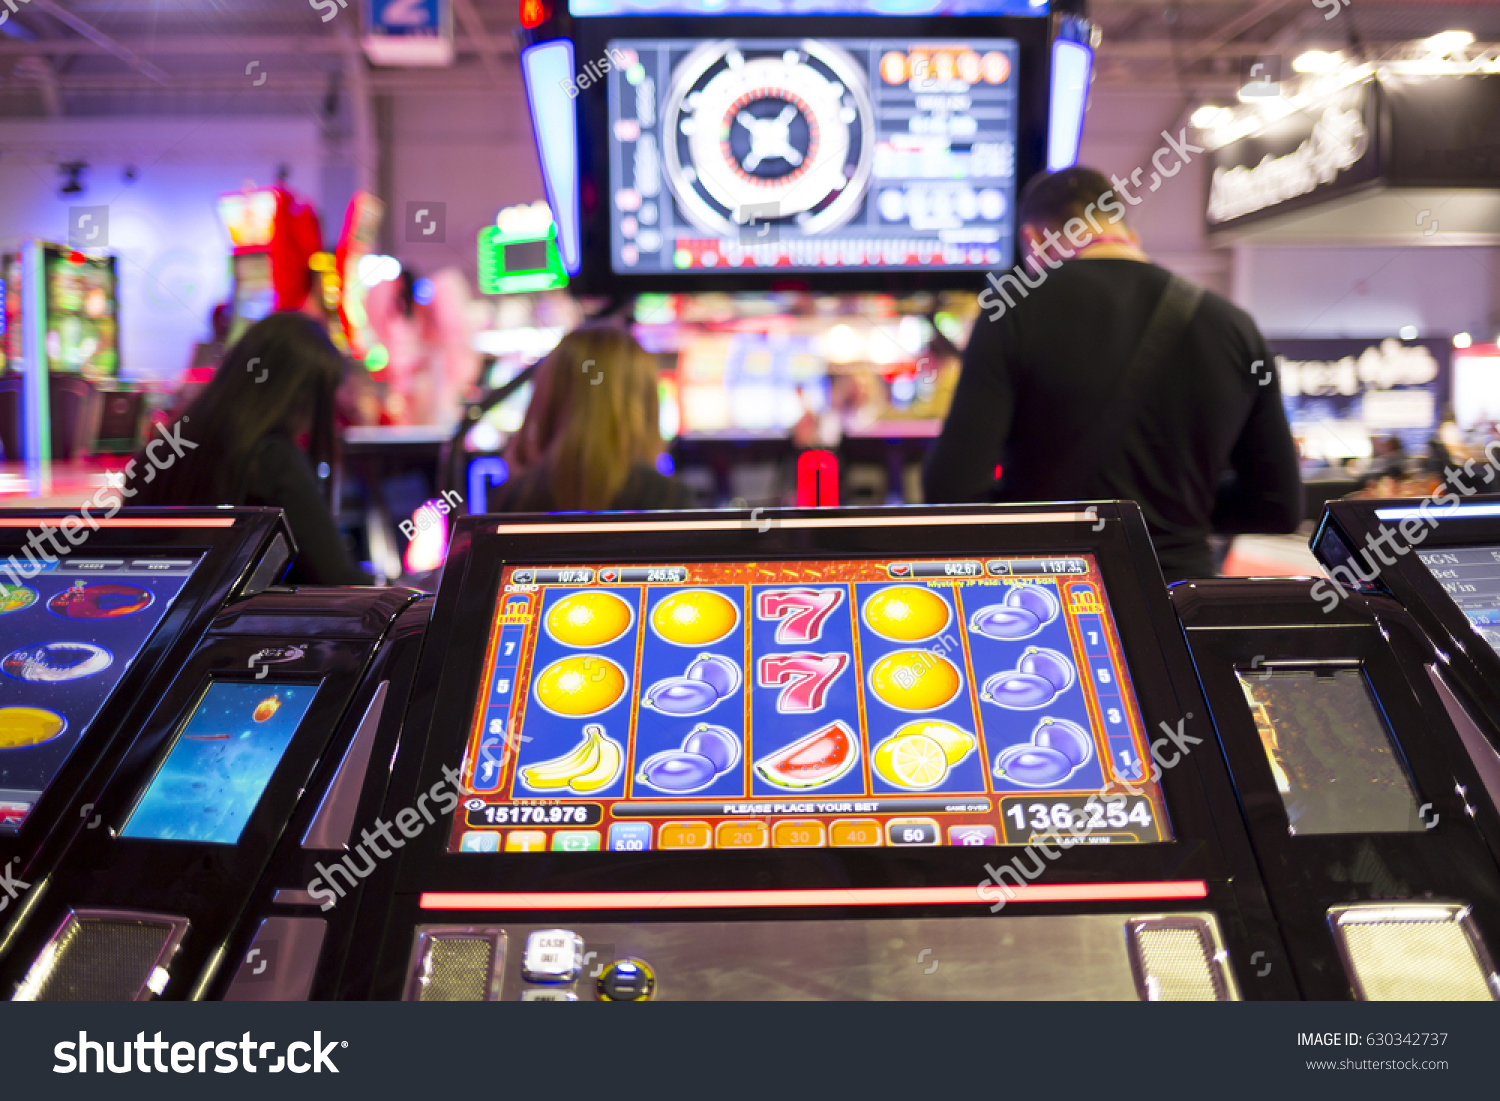 Do Casinos Buy Or Lease Slot Machines